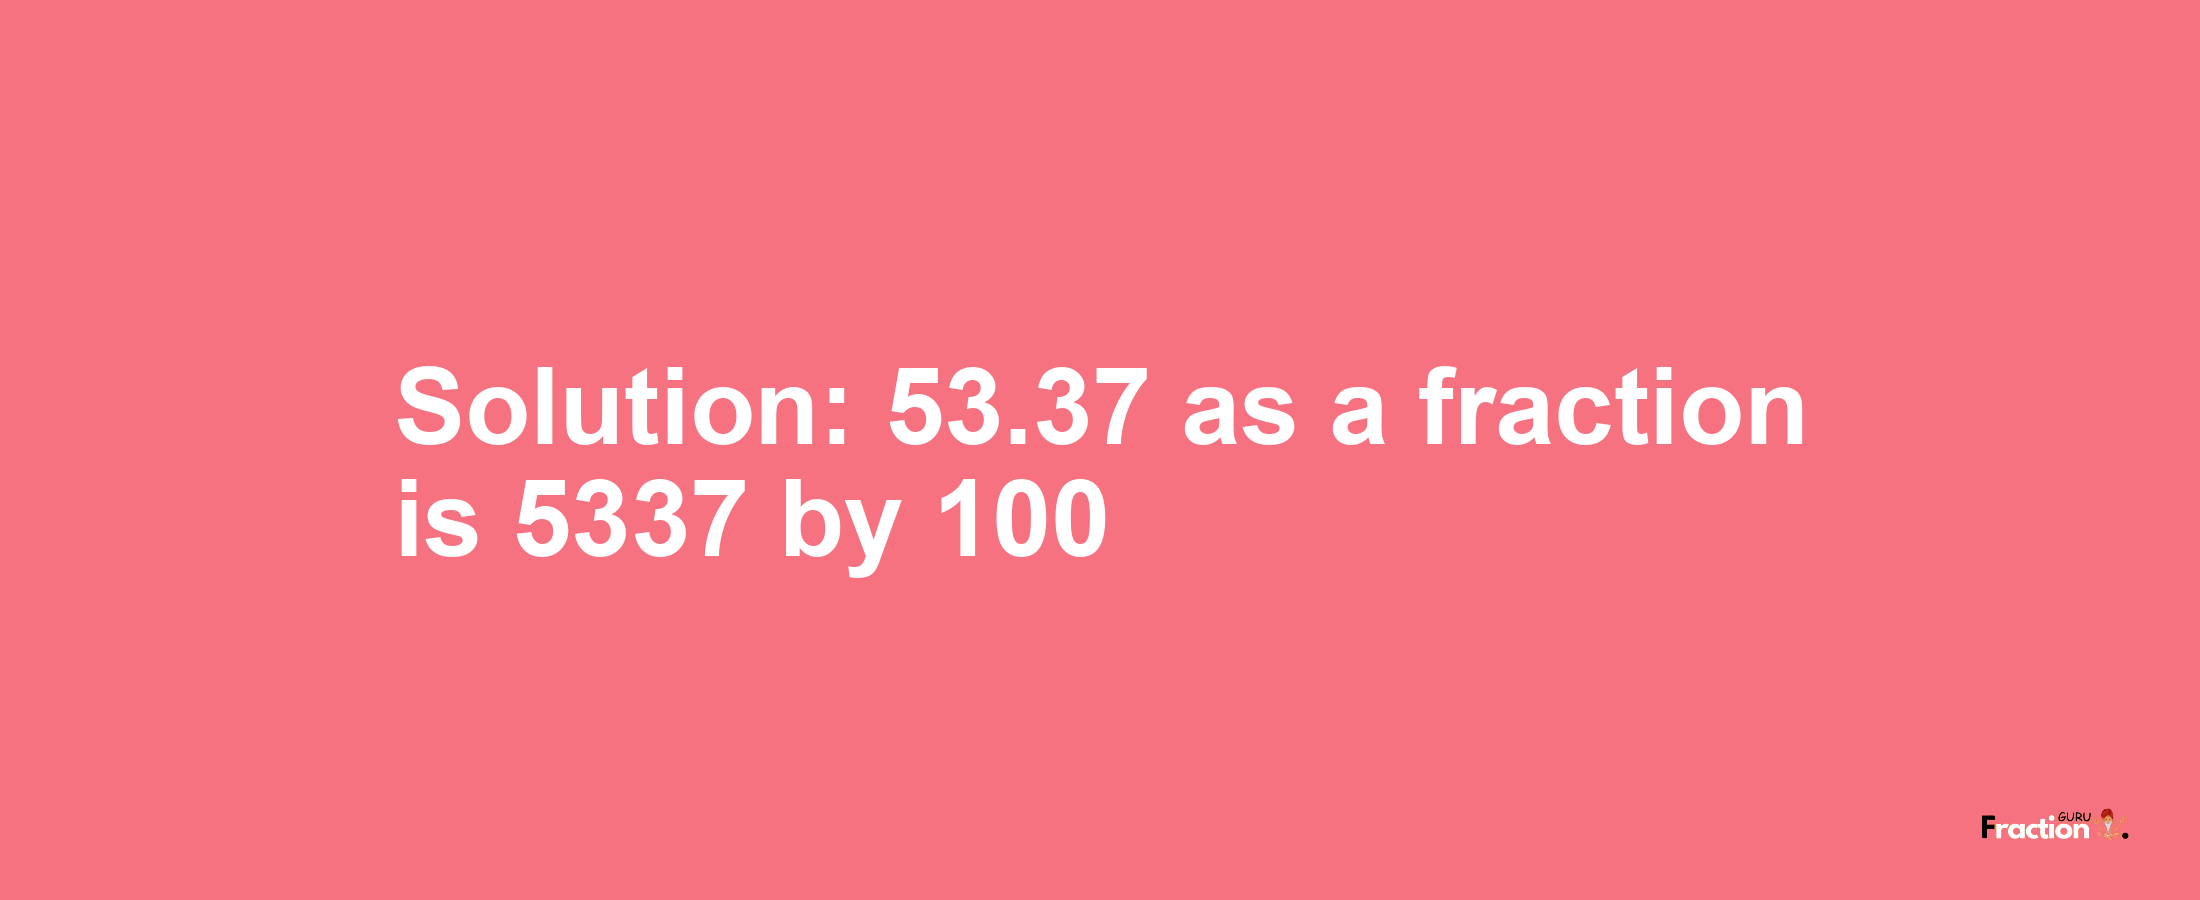 Solution:53.37 as a fraction is 5337/100